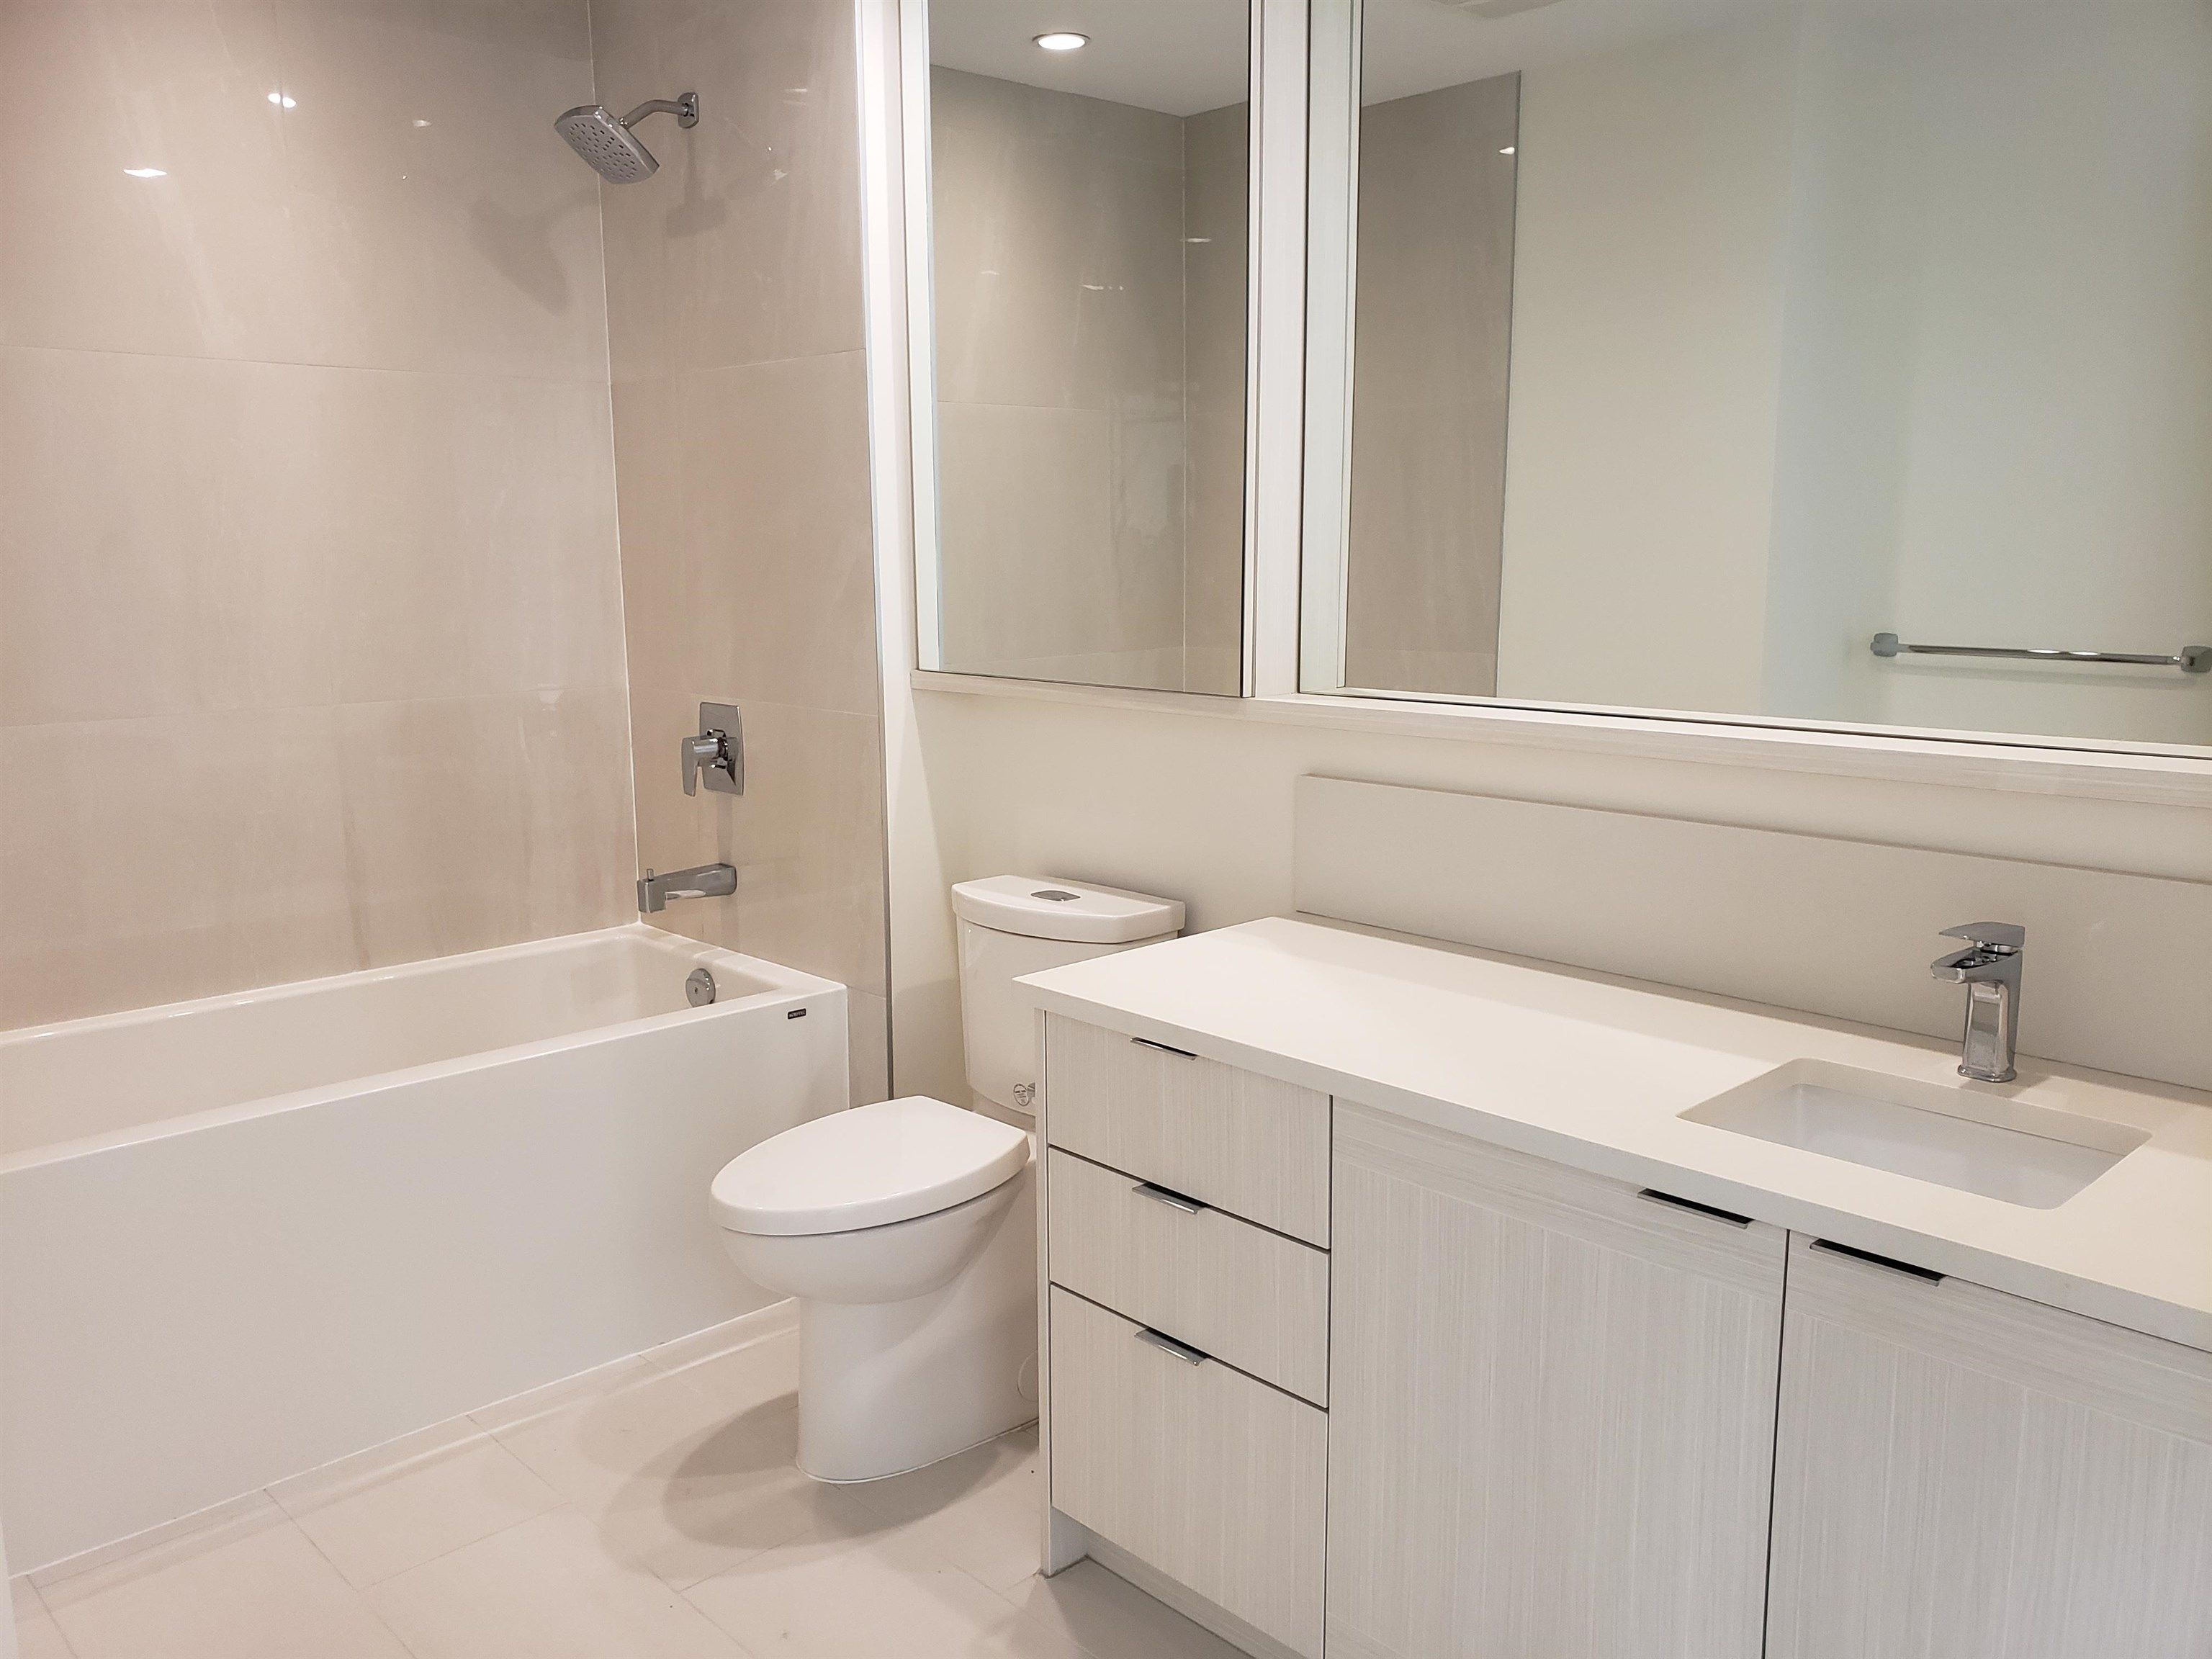 Photo 11: Photos: 506 5051 IMPERIAL STREET in Burnaby: Metrotown Condo for sale (Burnaby South)  : MLS®# R2626977